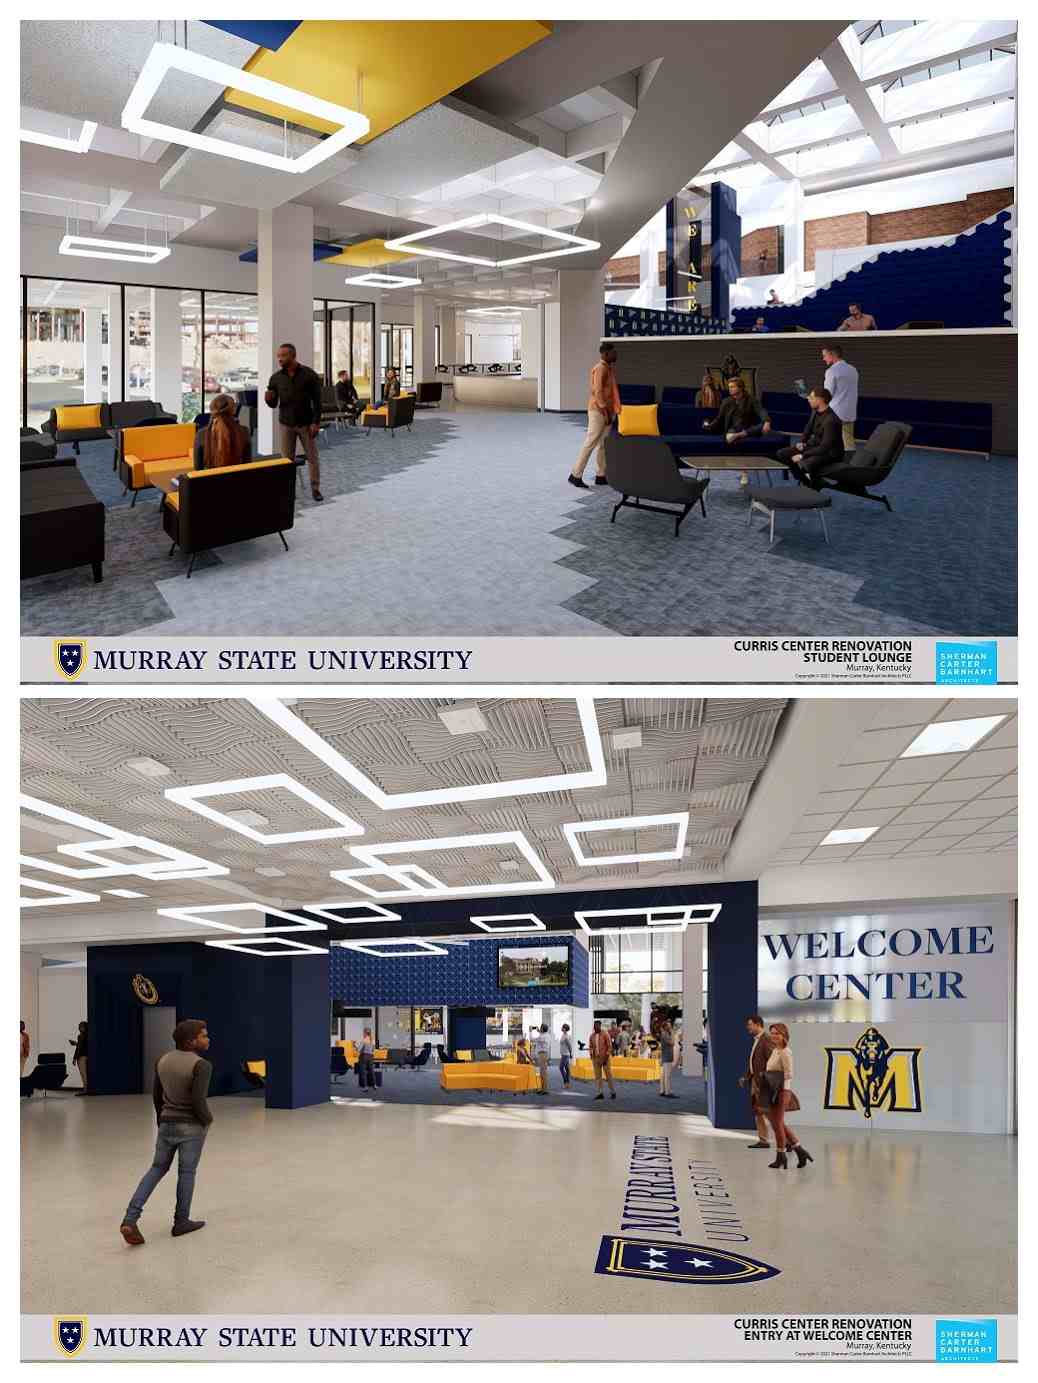 renderings of the Curris Center located on Ӱֱ State University’s campus